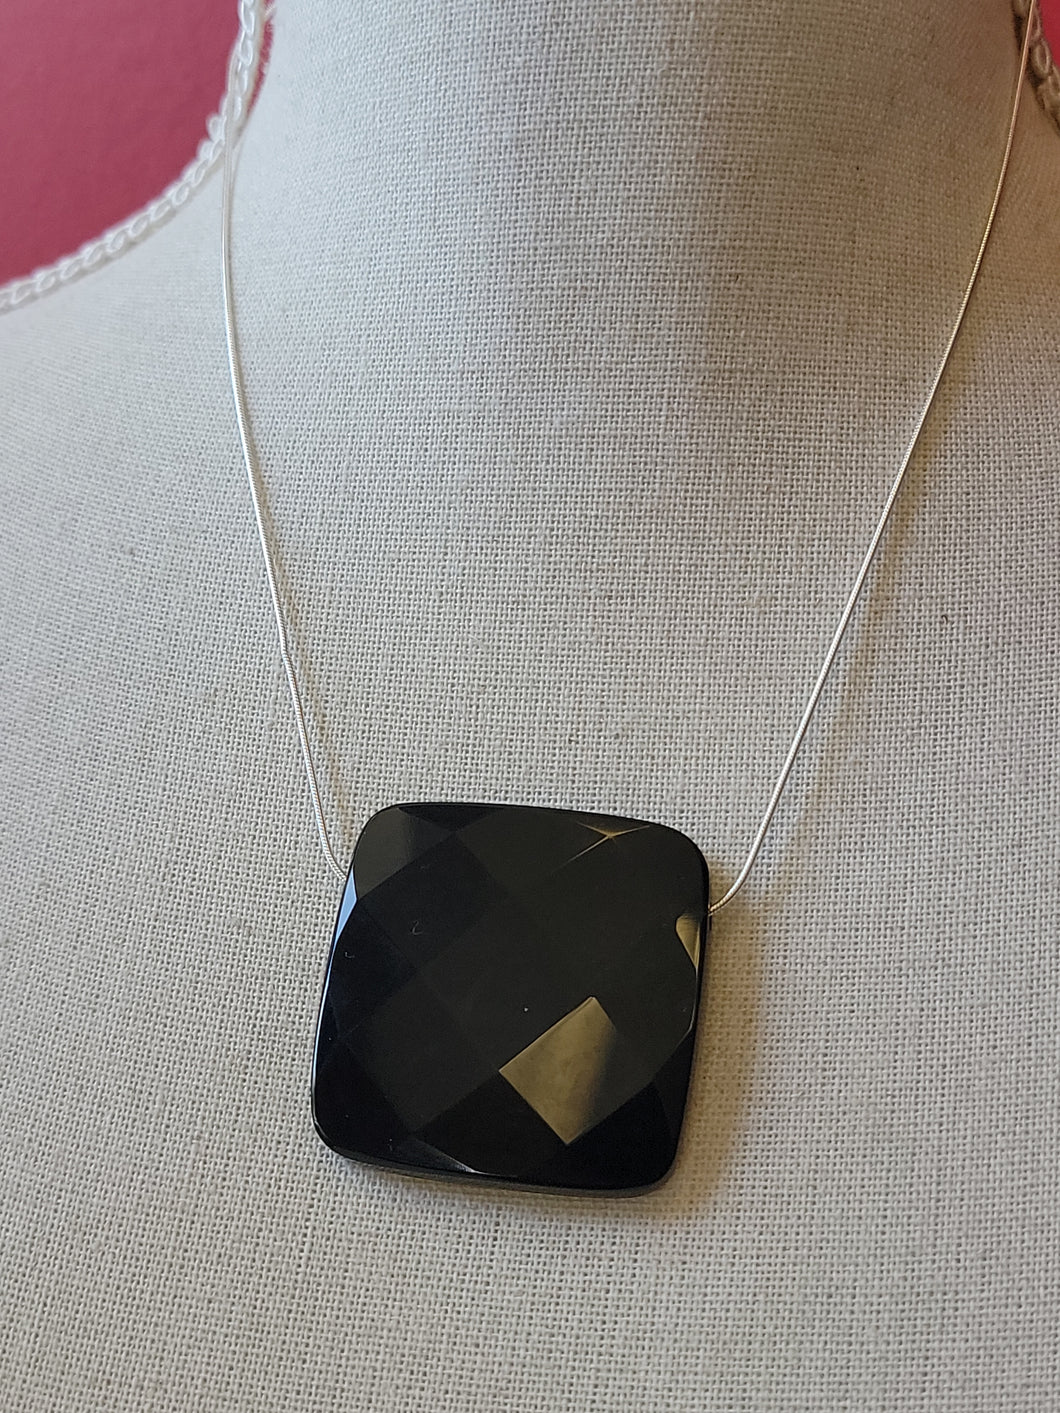 S.S. Faceted Black Onyx Necklaces